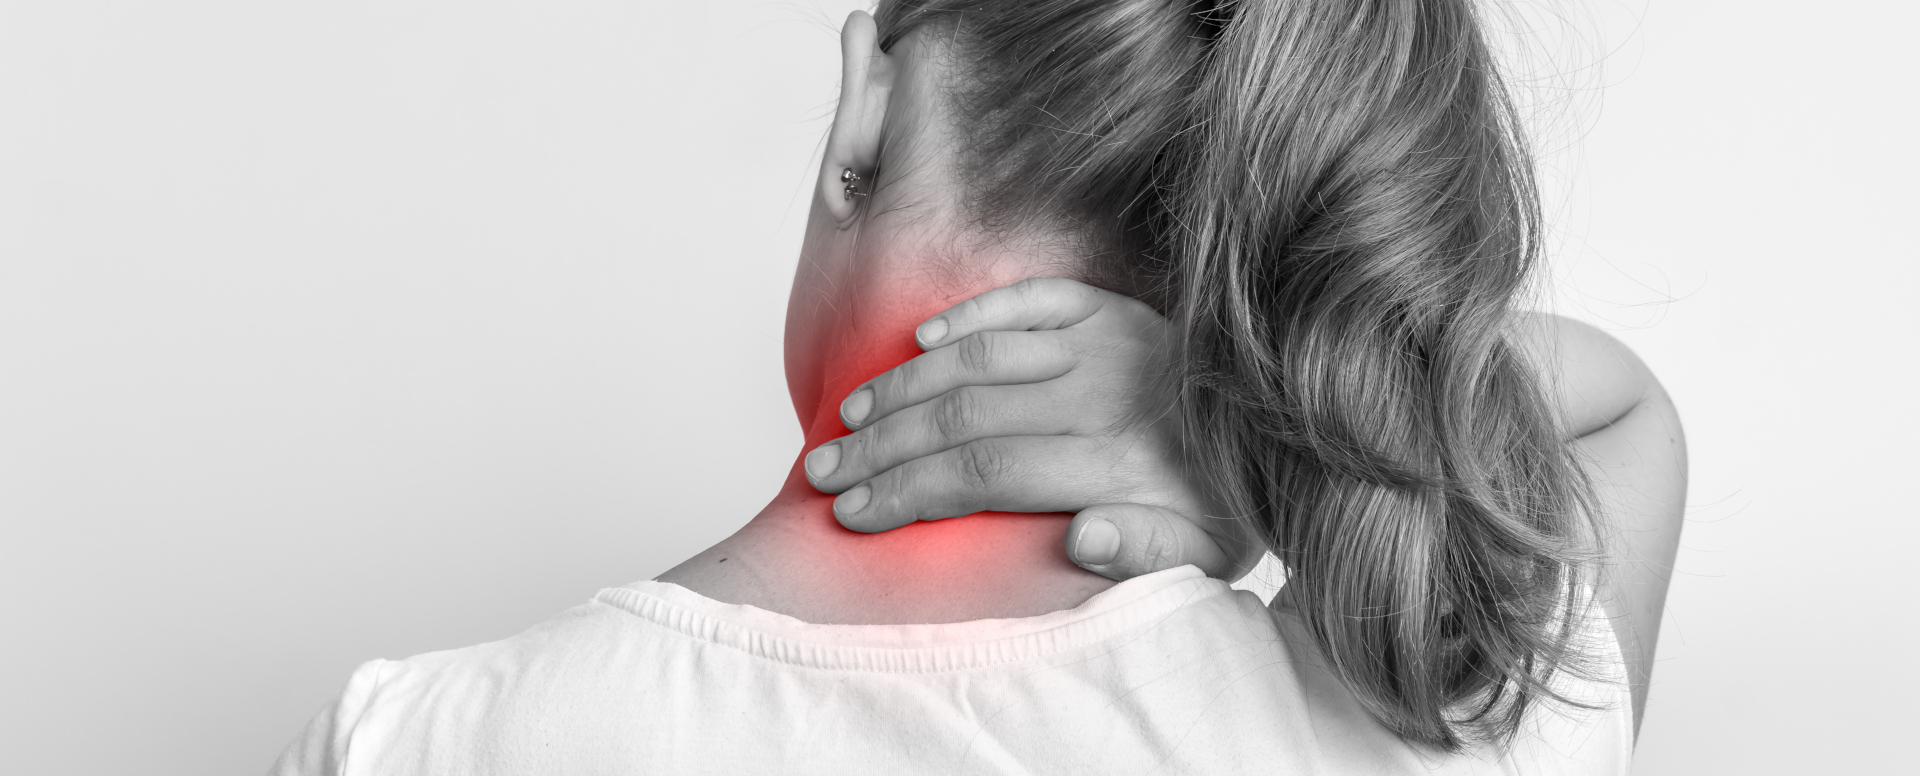 How Your Neck Pain May Affect Your Breathing